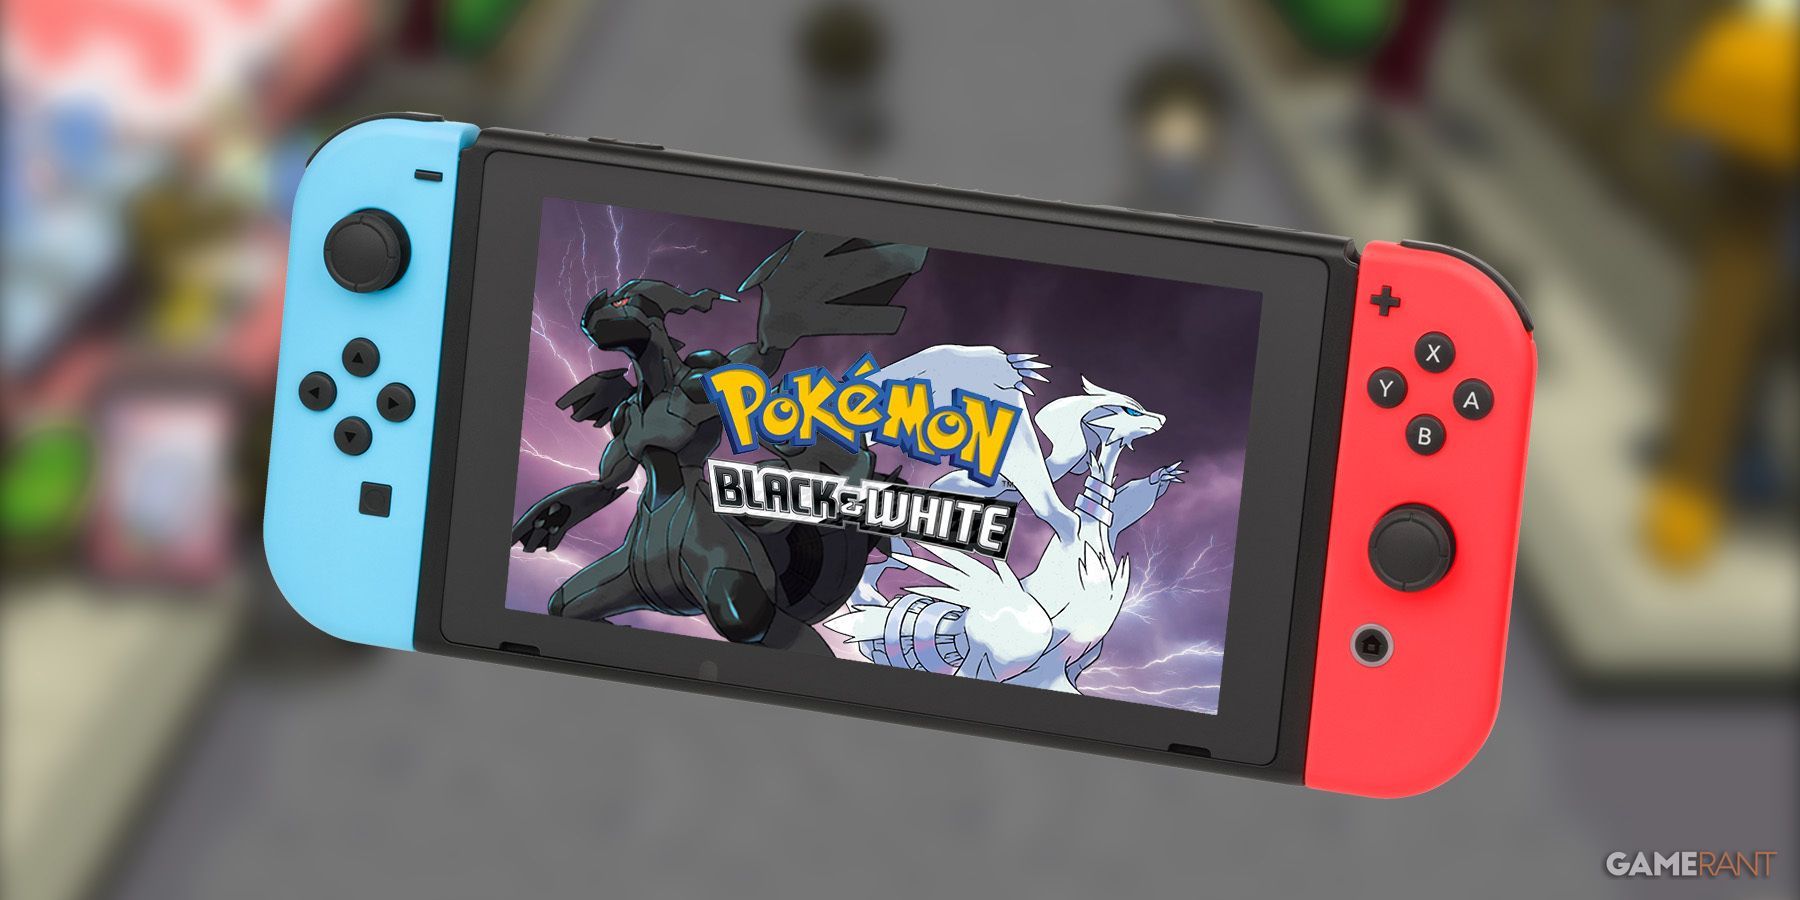 Pokemon Black & White Don't Need Remakes, But They Sure Could Use